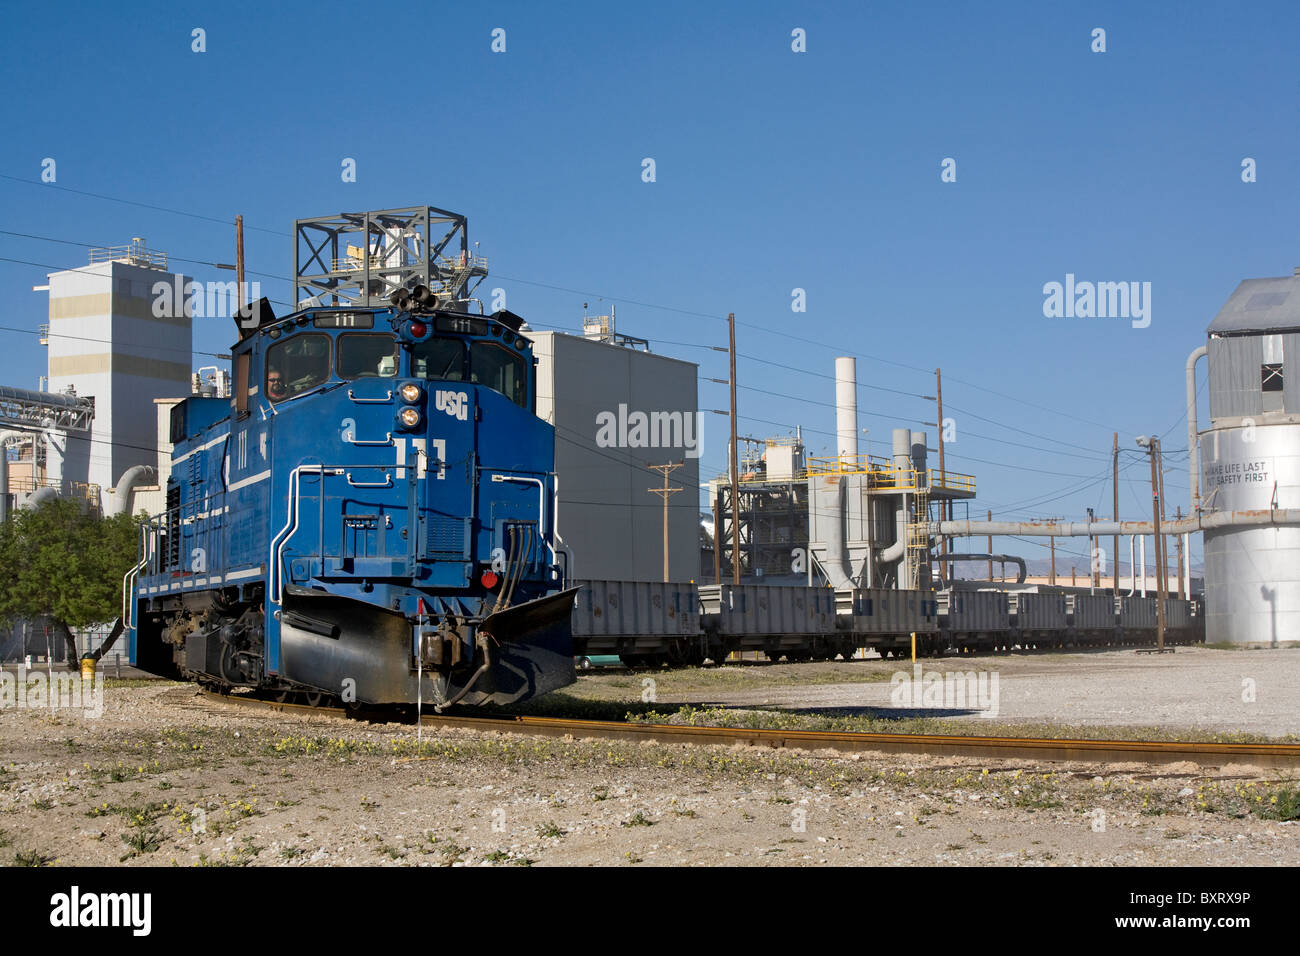 Plaster City mine train dumps a load of gypsum at the US Gypsum board plant in Southern California, west of El Centro, CA. USA Stock Photo